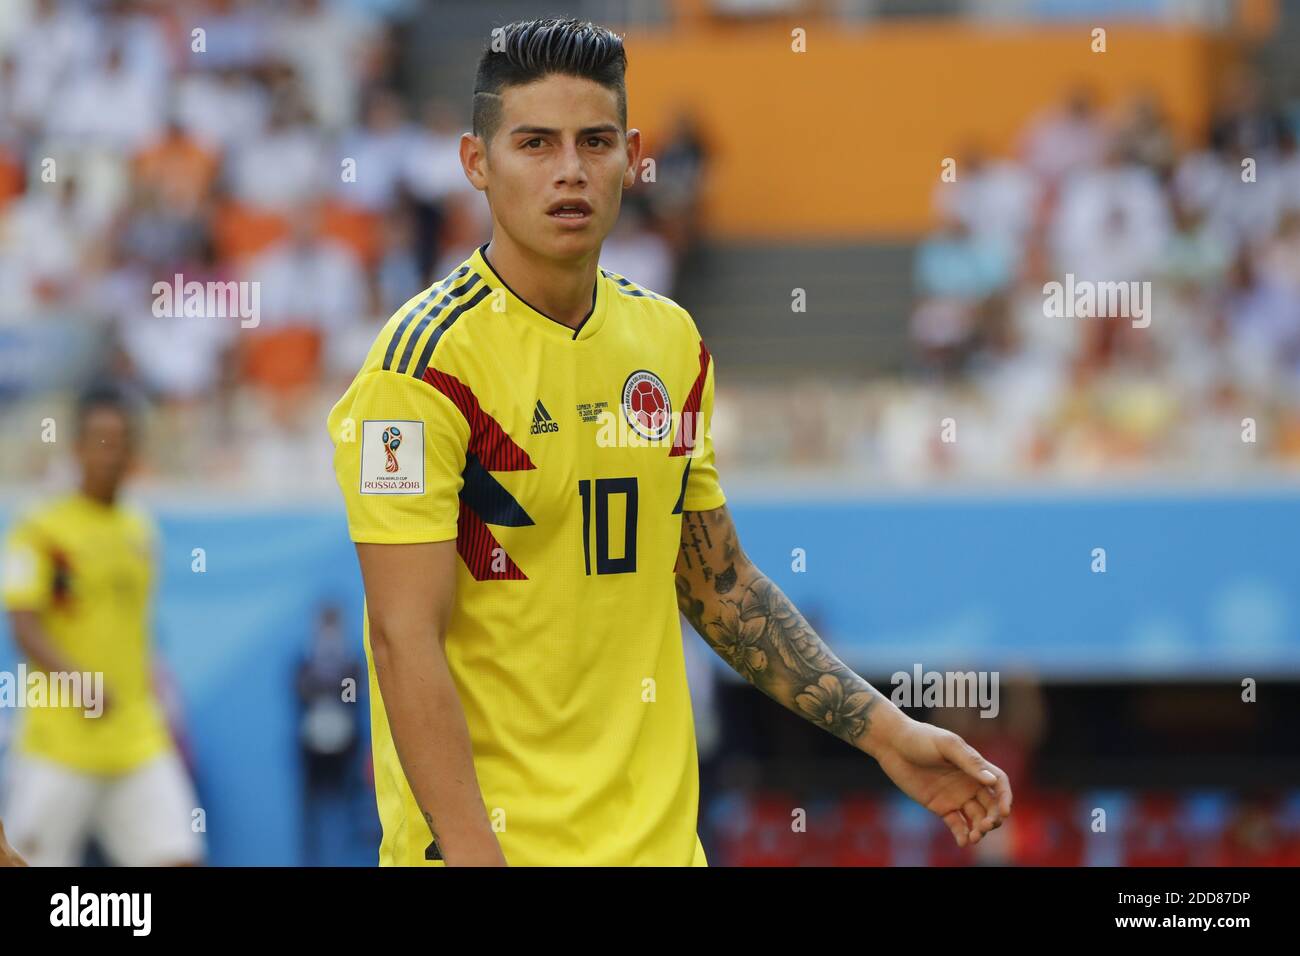 Colombia's James Rodriguez during the 2018 FIFA World Cup Russia game,  Colombia vs Japan in Saransk Stadium, Saransk, Russia on June 19, 2018.  Japan won 2-1. Photo by Henri Szwarc/ABACAPRESS.COM Stock Photo - Alamy